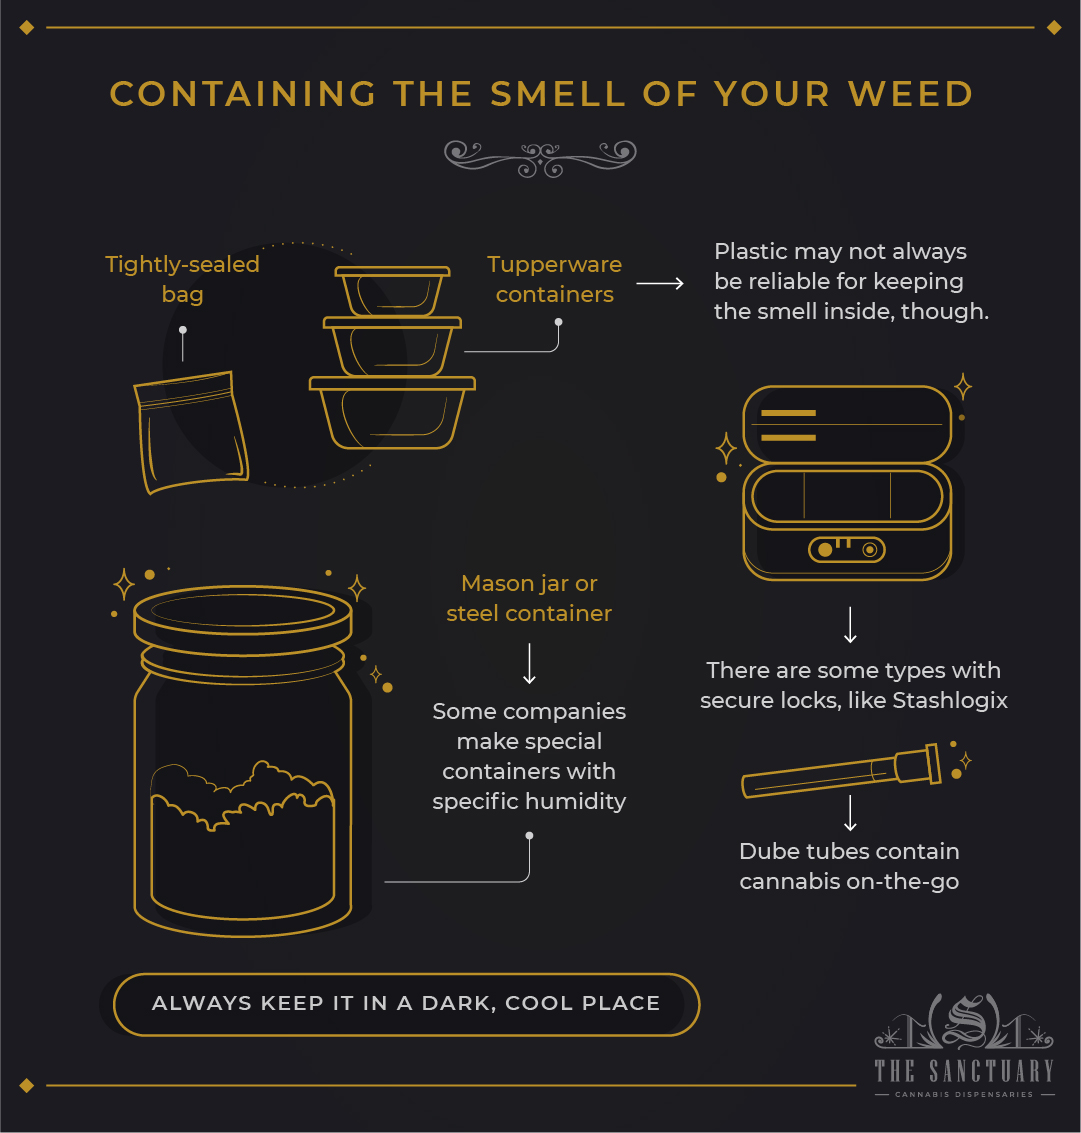 How to Hide the Smell of Weed